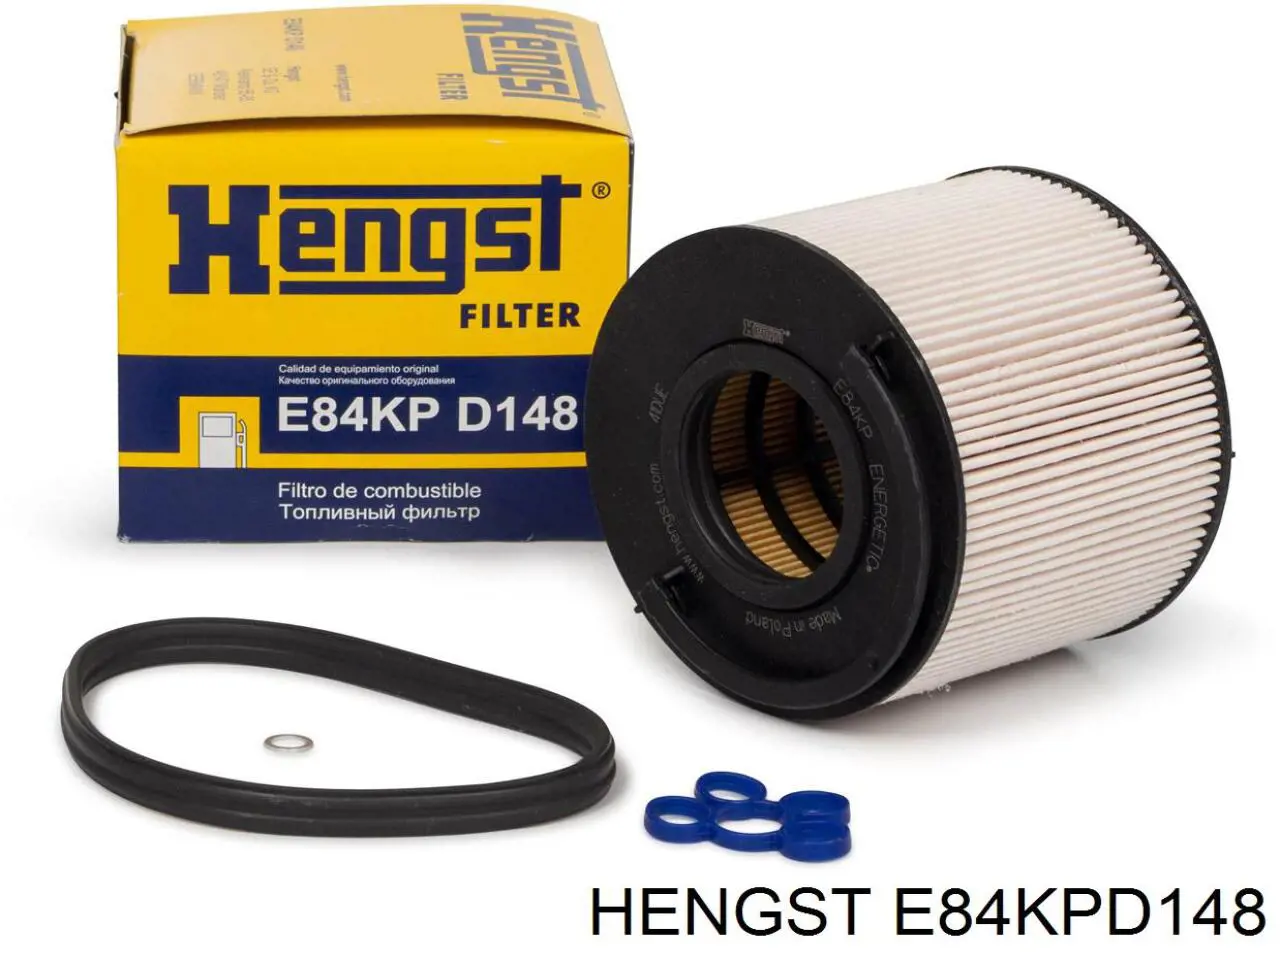 E84KPD148 Hengst filtro combustible